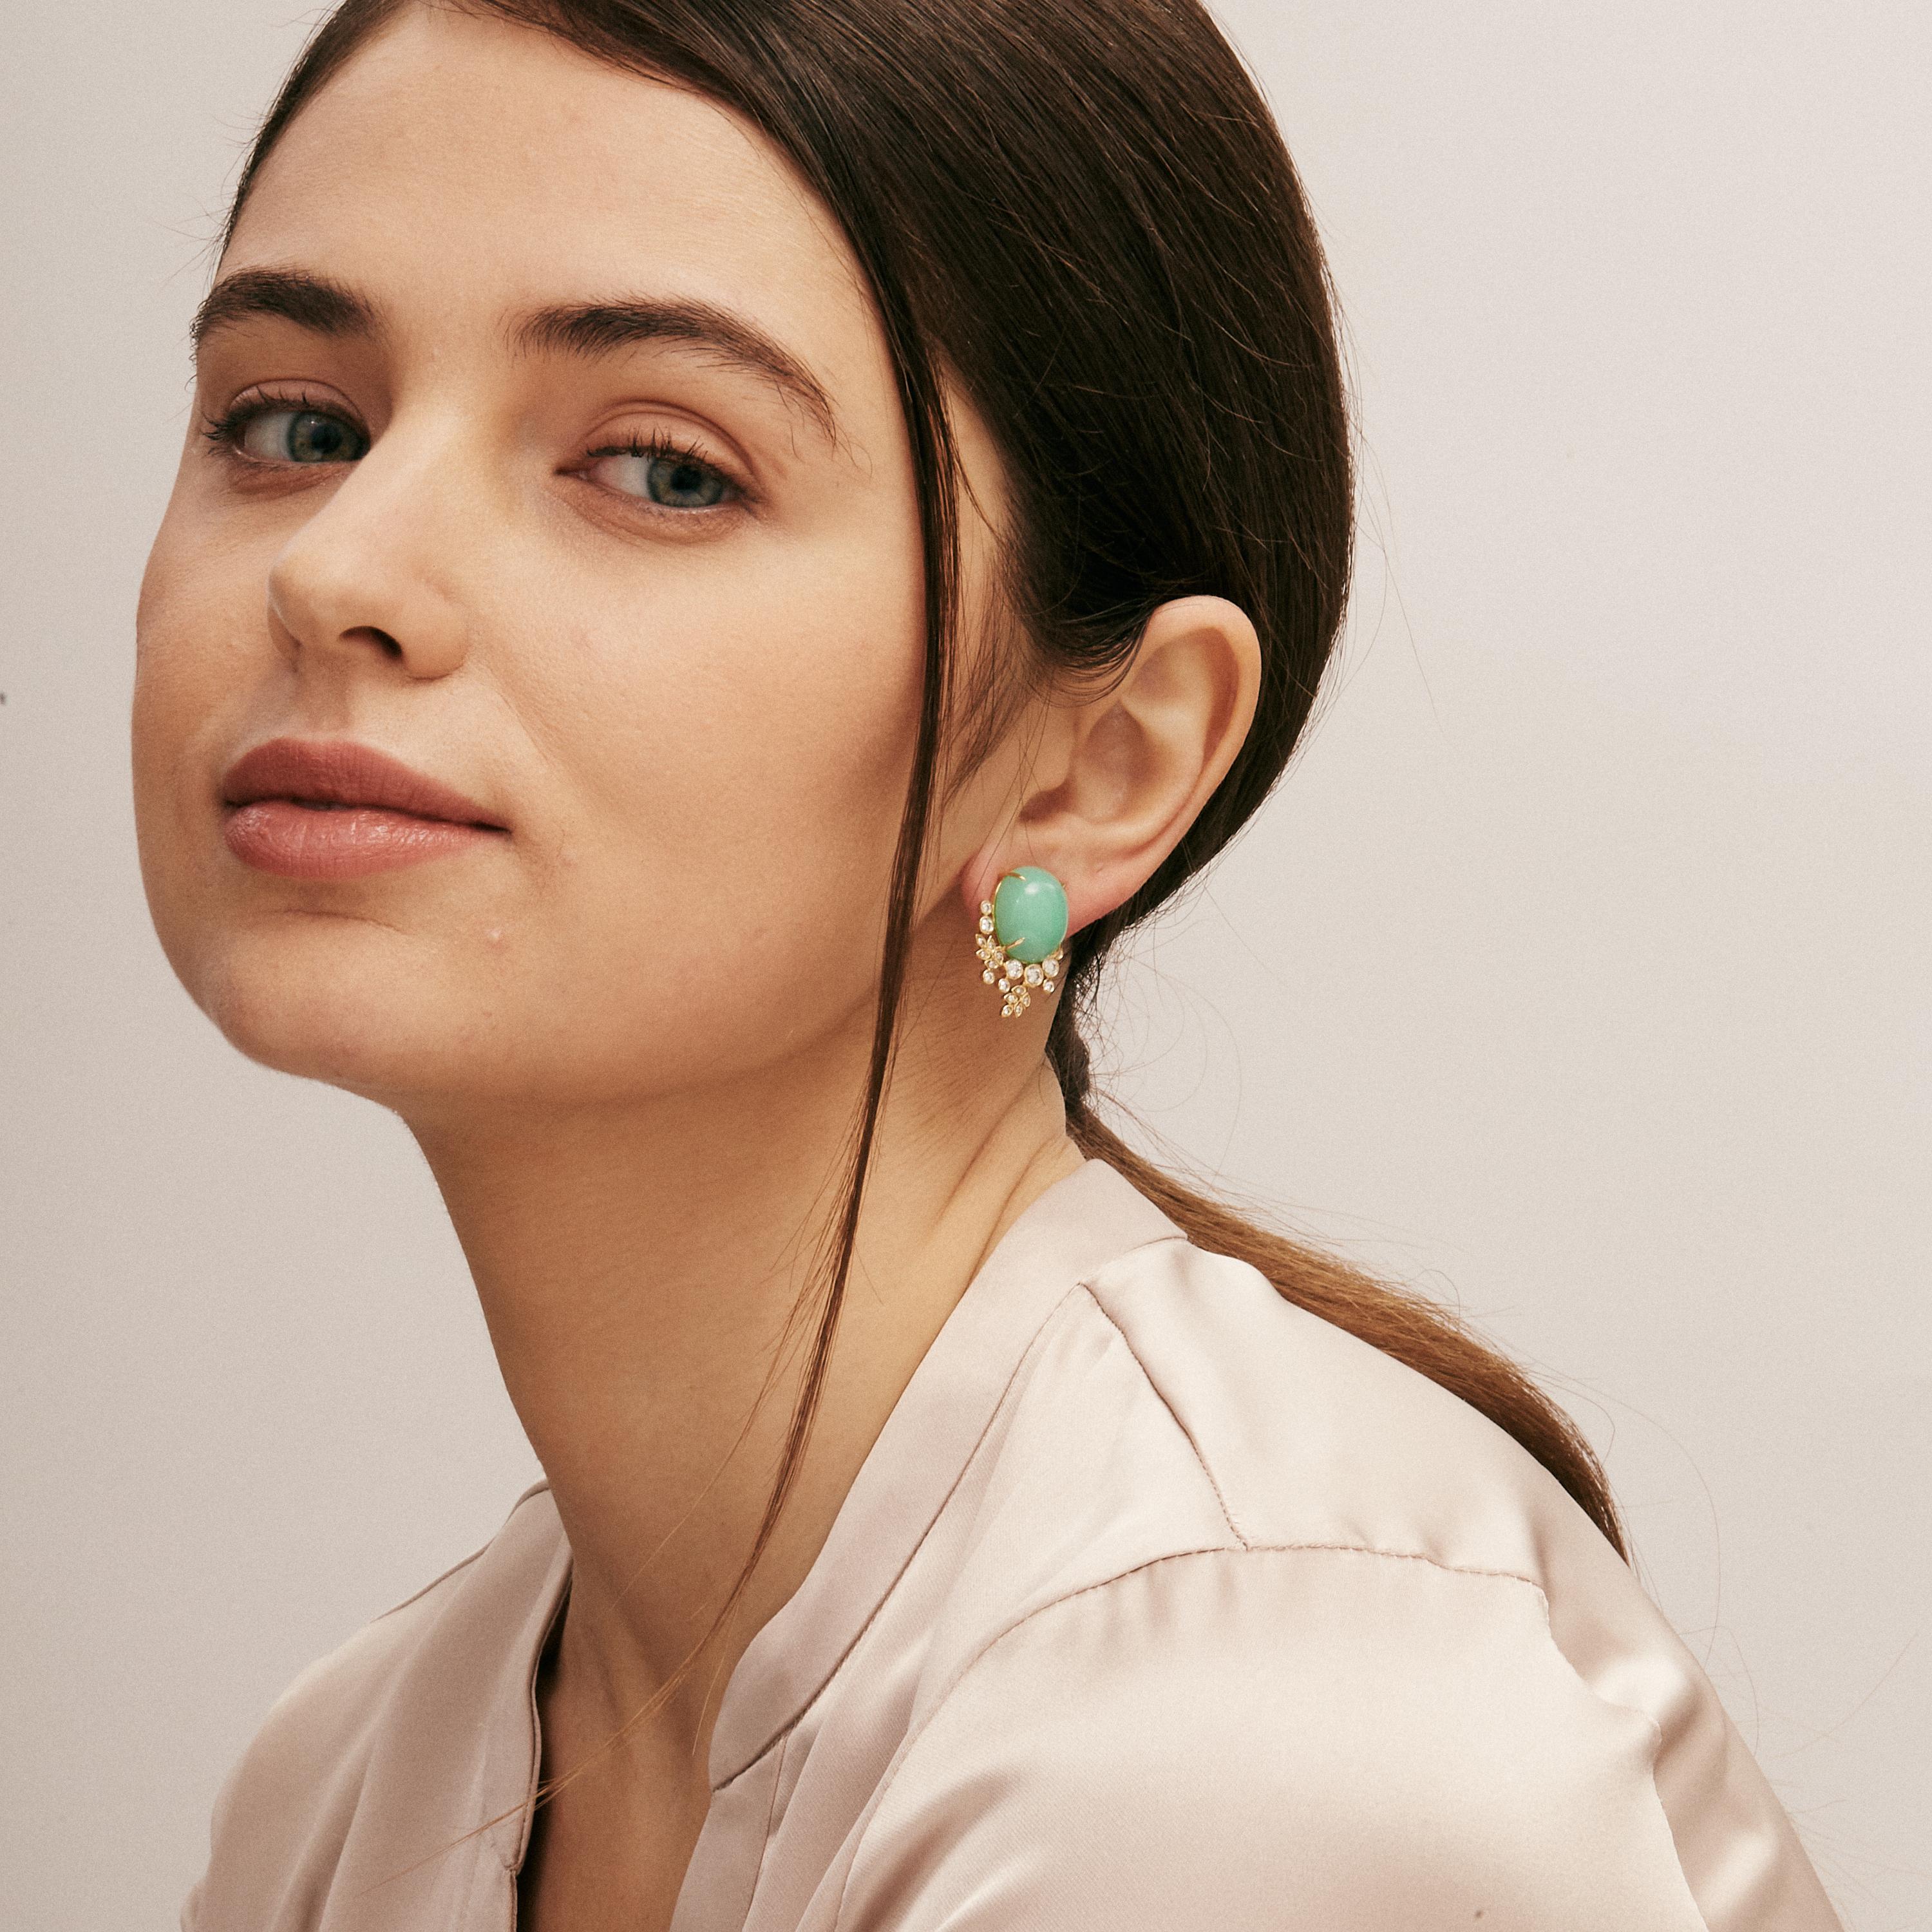 Created in 18 karat yellow gold
Chrysoprase 18 carats approx.
Diamonds 0.70 carat approx.
Omega clip-backs & posts
Limited Edition

Enchant your ears with these limited edition Candy Blue Topaz and Lemon Quartz Sugarloaf Earrings. Crafted in 18